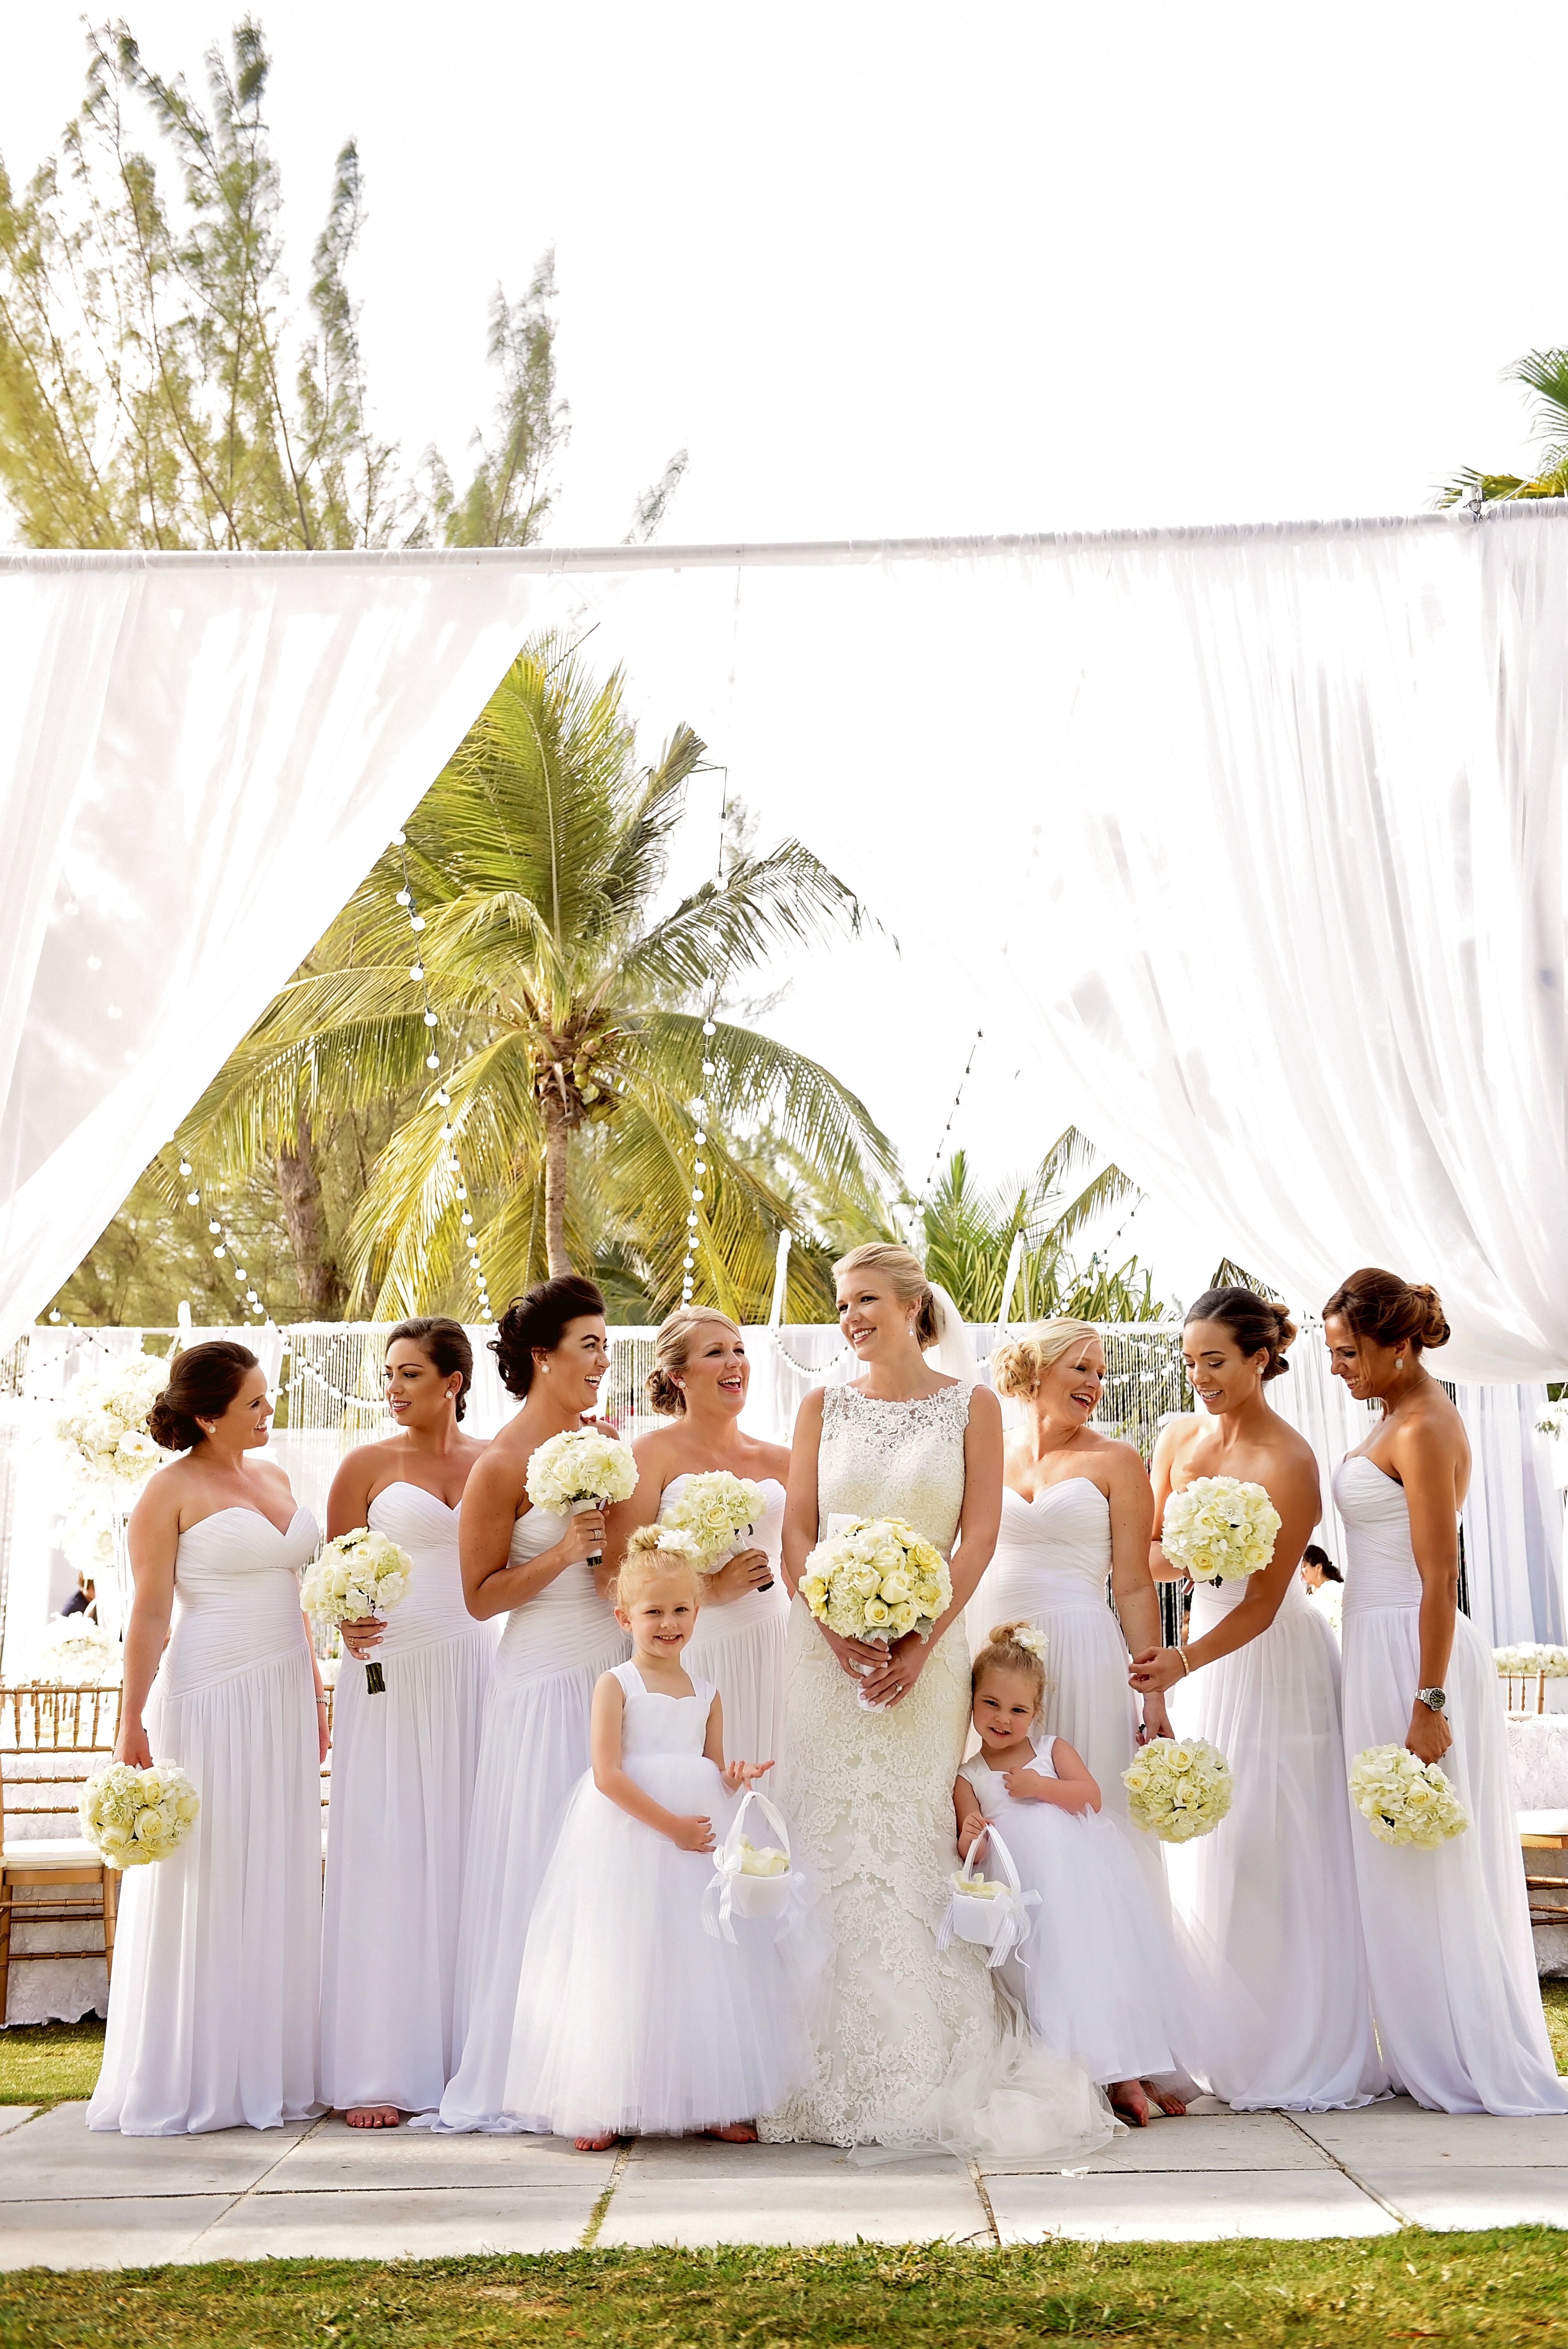 Accessories for white bridesmaid dresses on the beach